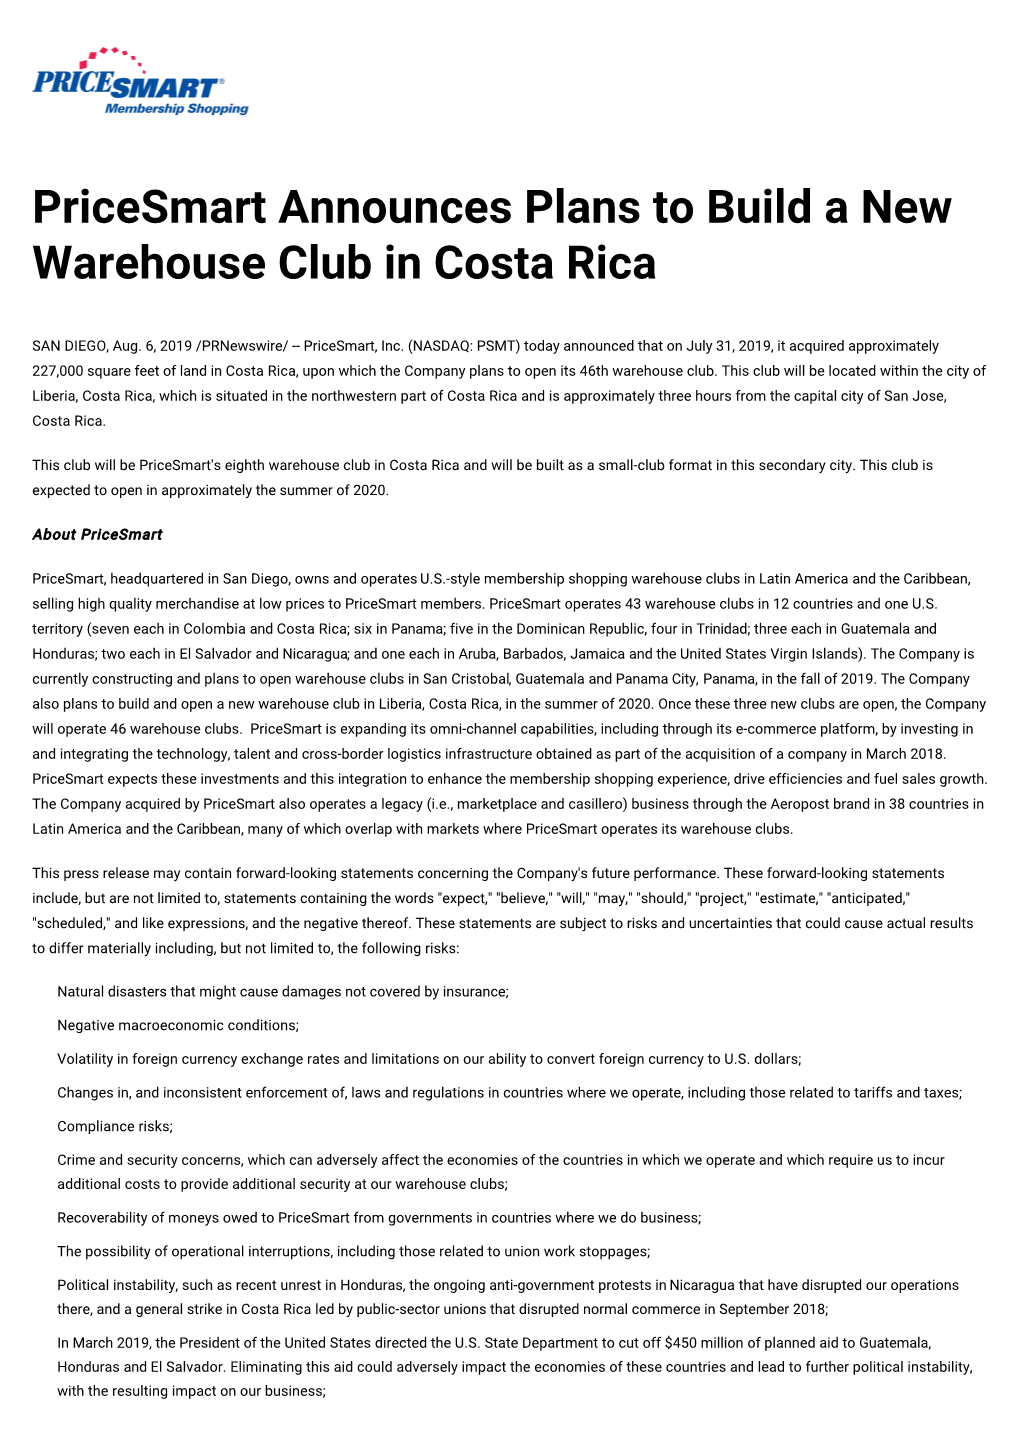 Pricesmart Announces Plans to Build a New Warehouse Club in Costa Rica